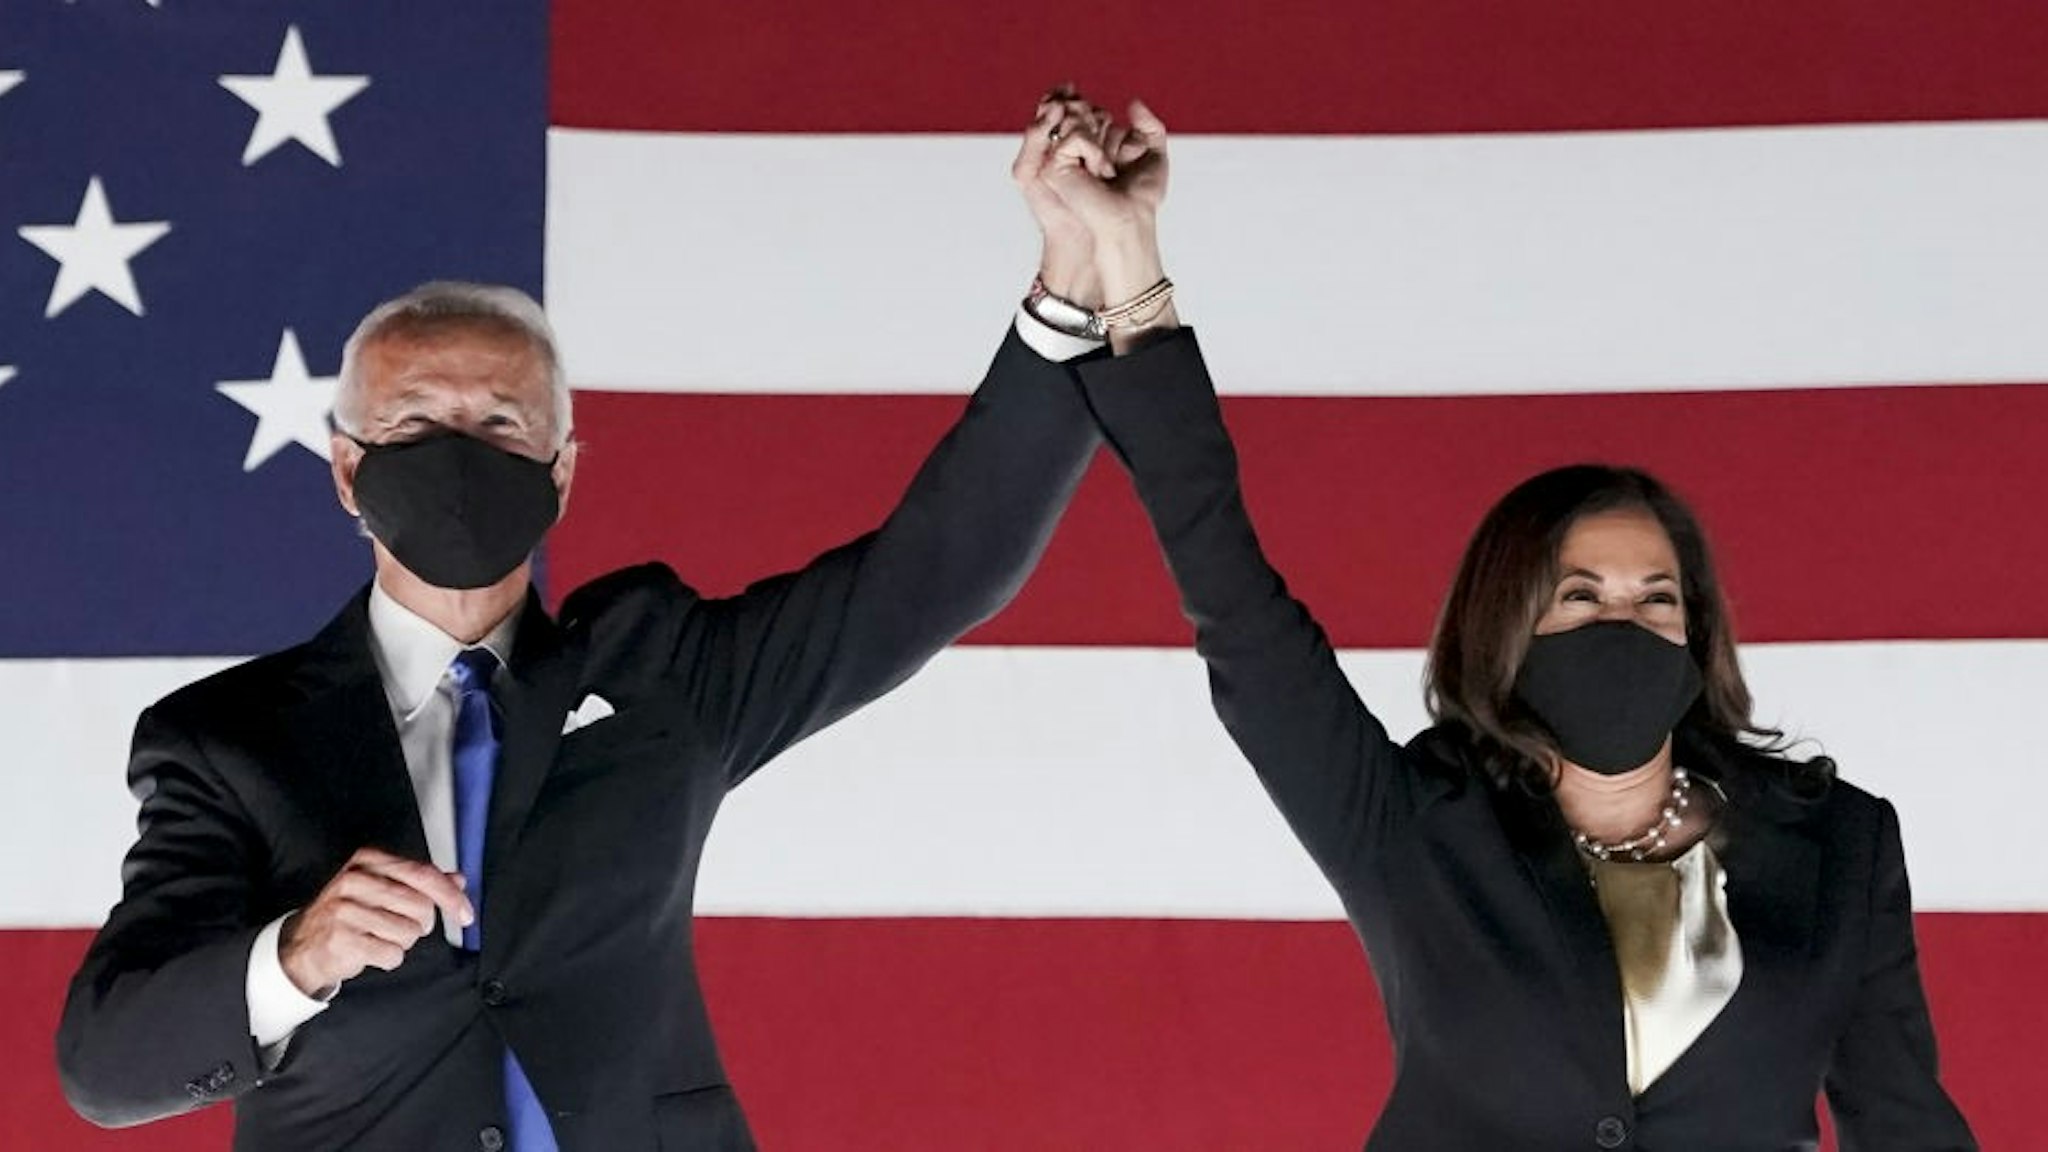 Former Vice President Joe Biden, Democratic presidential nominee, left, and Senator Kamala Harris, Democratic vice presidential nominee, wear protective masks while holding hands outside the Chase Center during the Democratic National Convention in Wilmington, Delaware, U.S., on Thursday, Aug. 20, 2020. Biden accepted the Democratic nomination to challenge President Donald Trump, urging Americans in a prime-time address to vote for new national leadership that will overcome deep U.S. political divisions. Photographer: